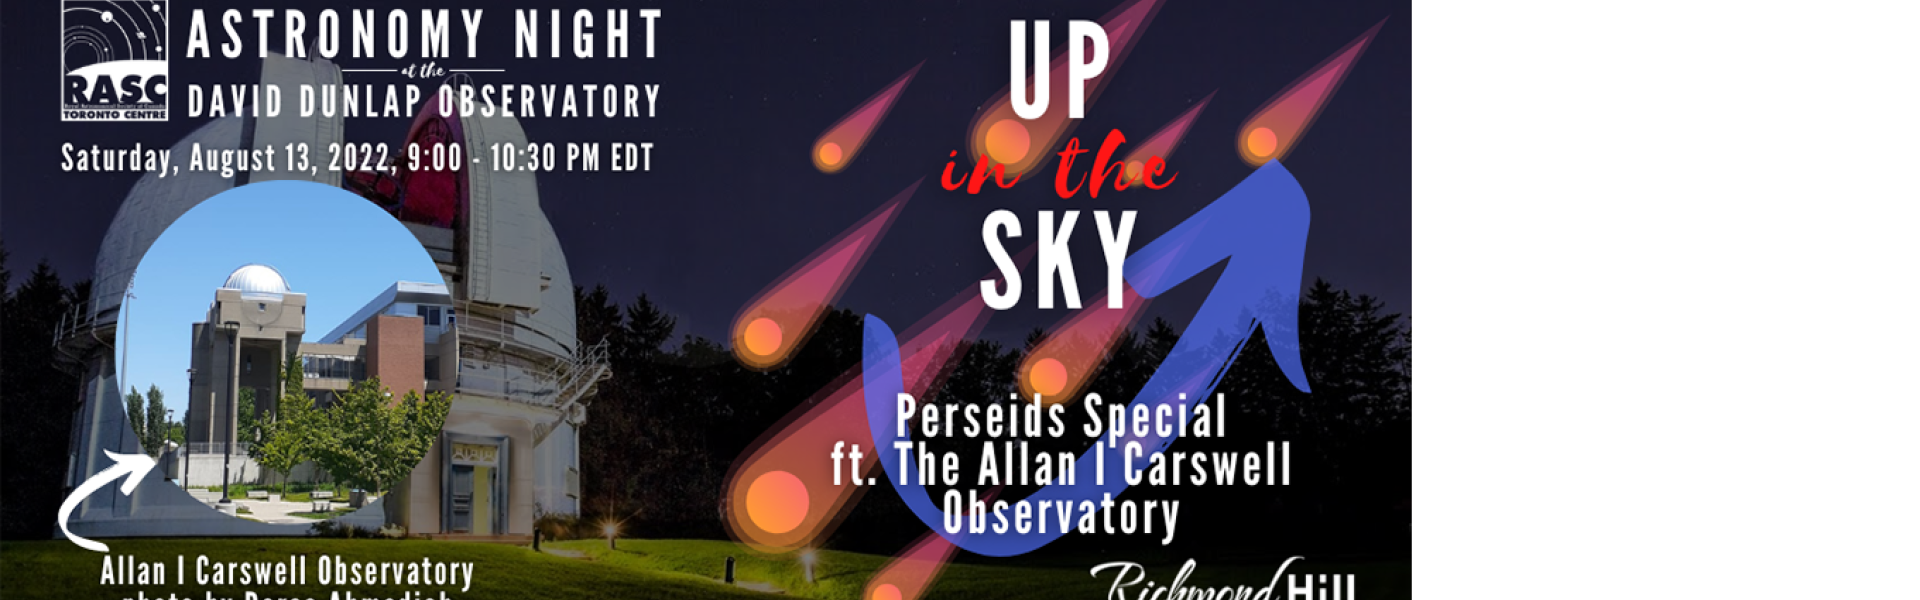 Up in the Sky: Perseids Special